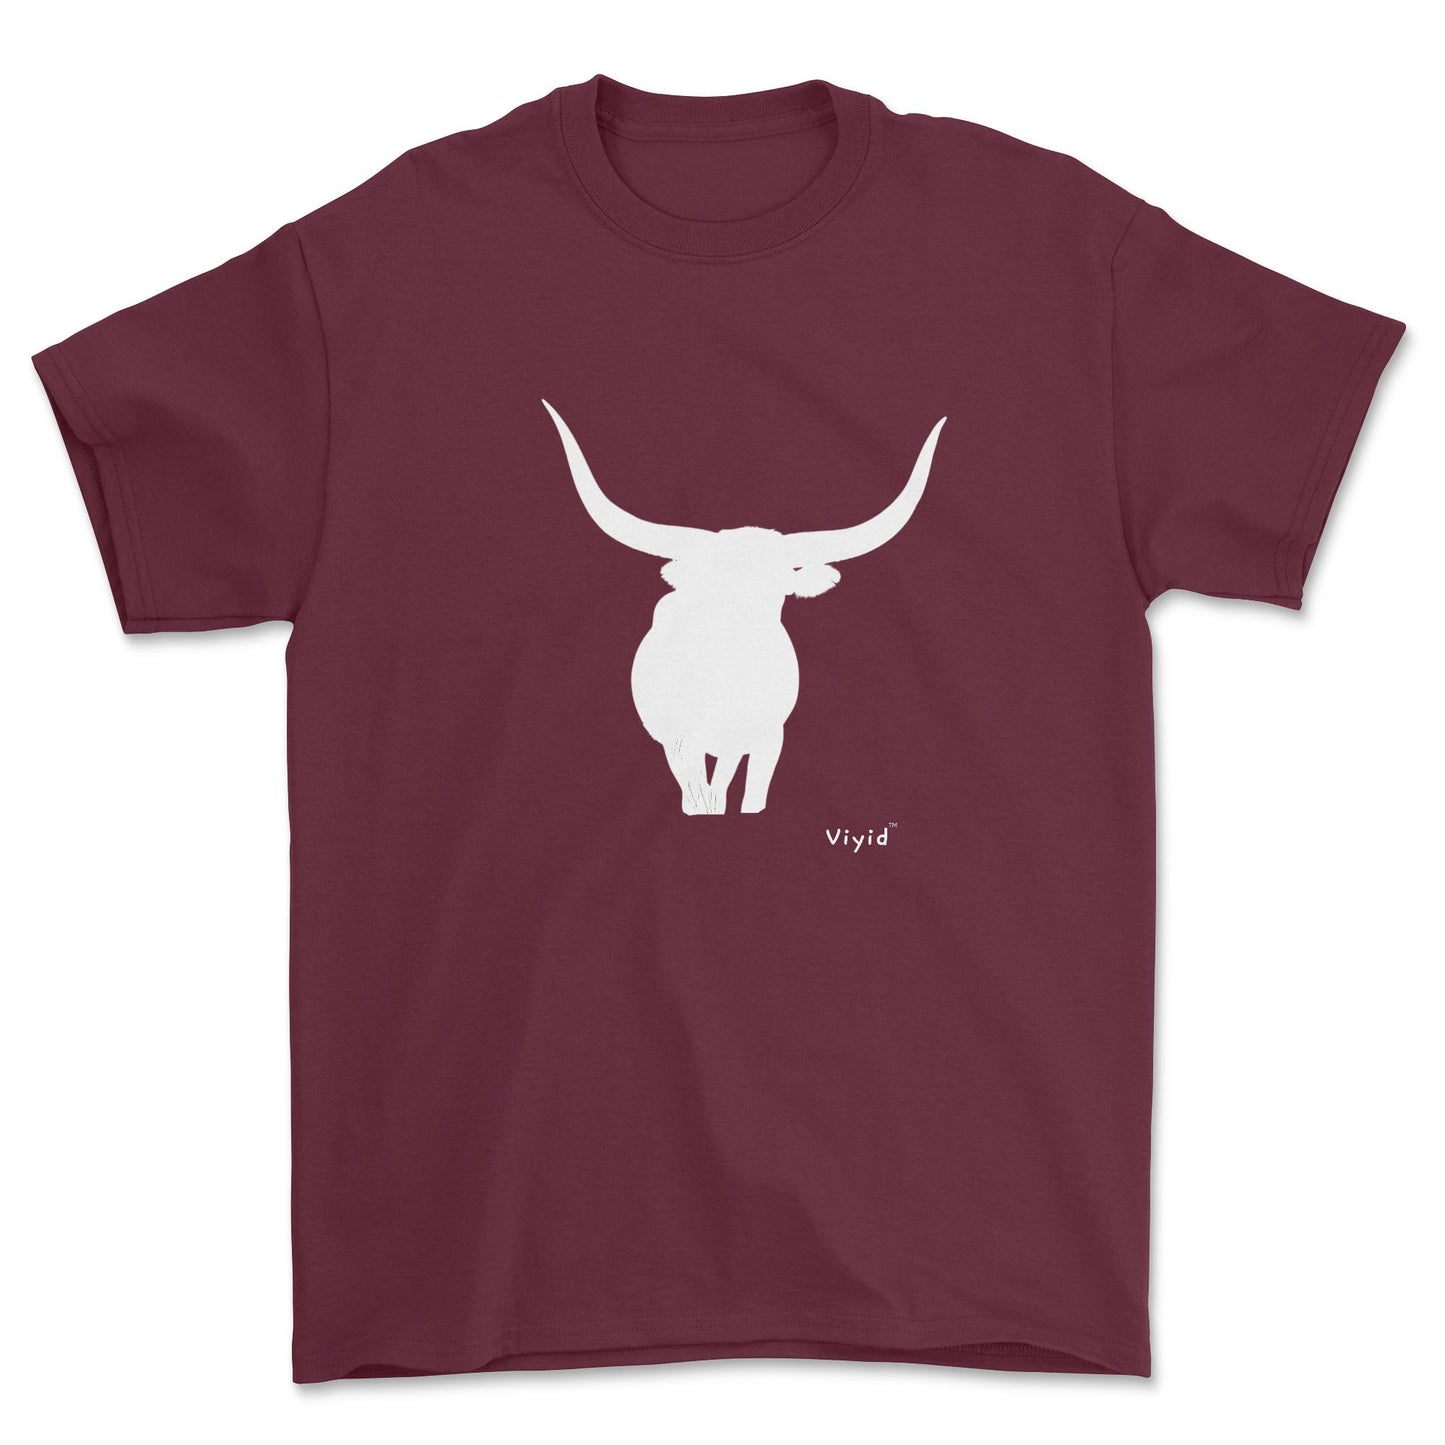 silhouette bull youth t-shirt maroon